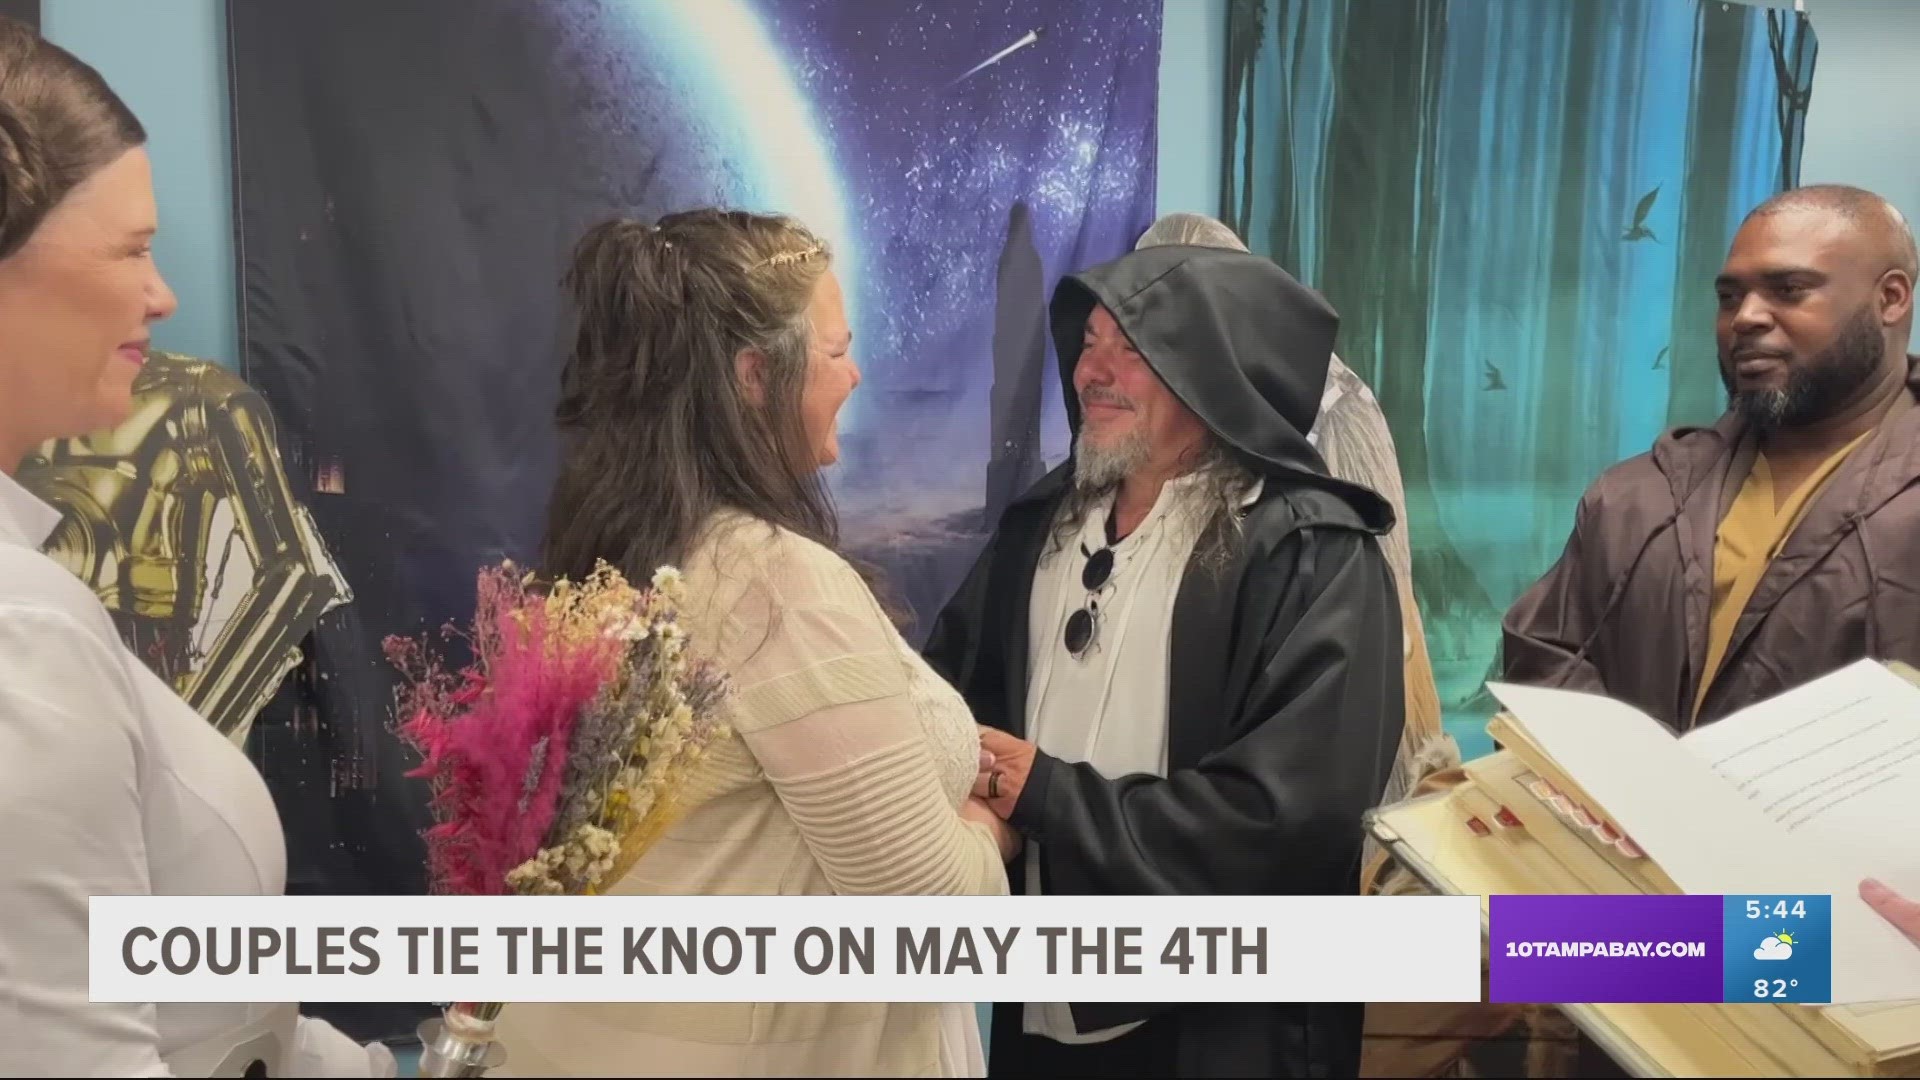 Couples dressed in Star Wars cosplay costumes said "I do" on "May the 4th be with you."